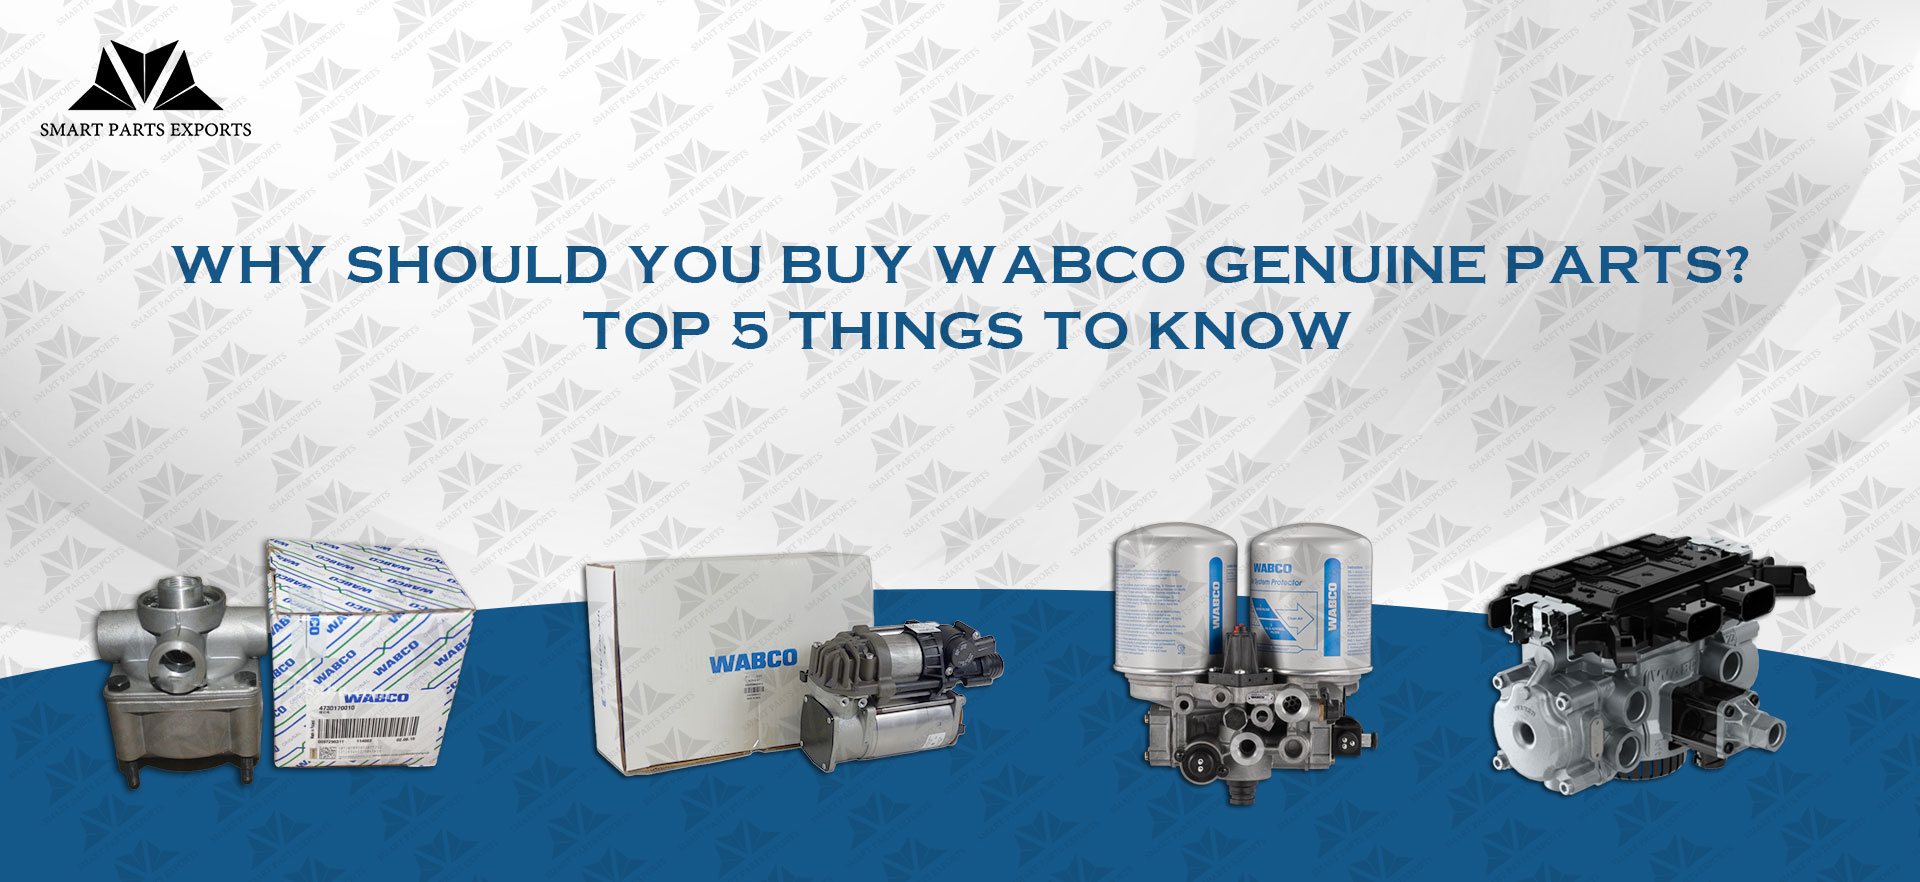 Why Should You Buy Wabco Genuine Parts? Top 5 Things to Know